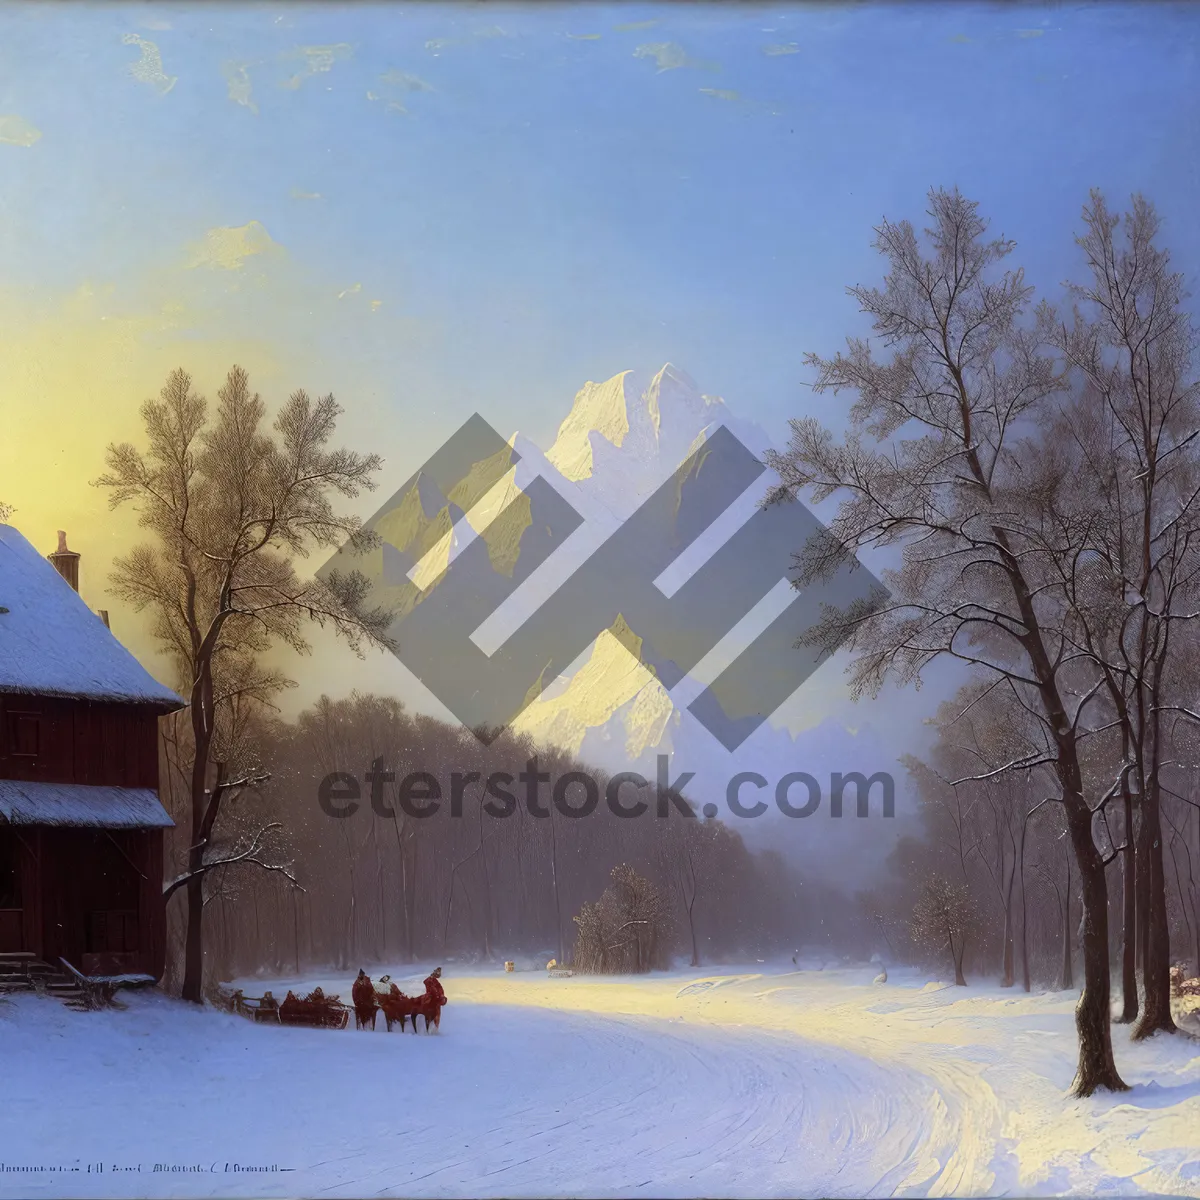 Picture of Frosty Winter Wonderland: Snowy Forest Landscape and Ski Slope